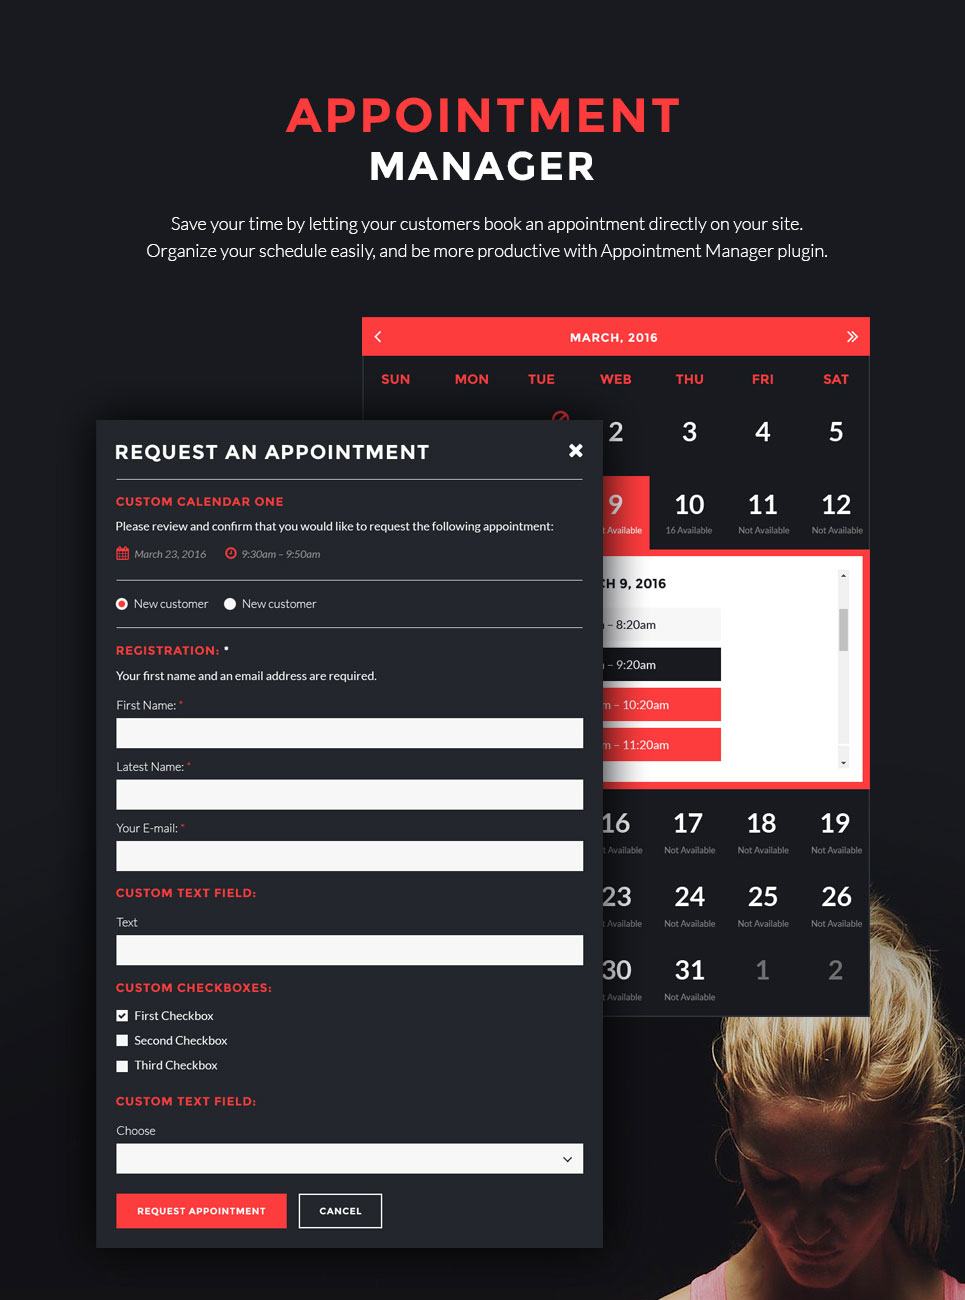 IronMass Theme Appointment Manager